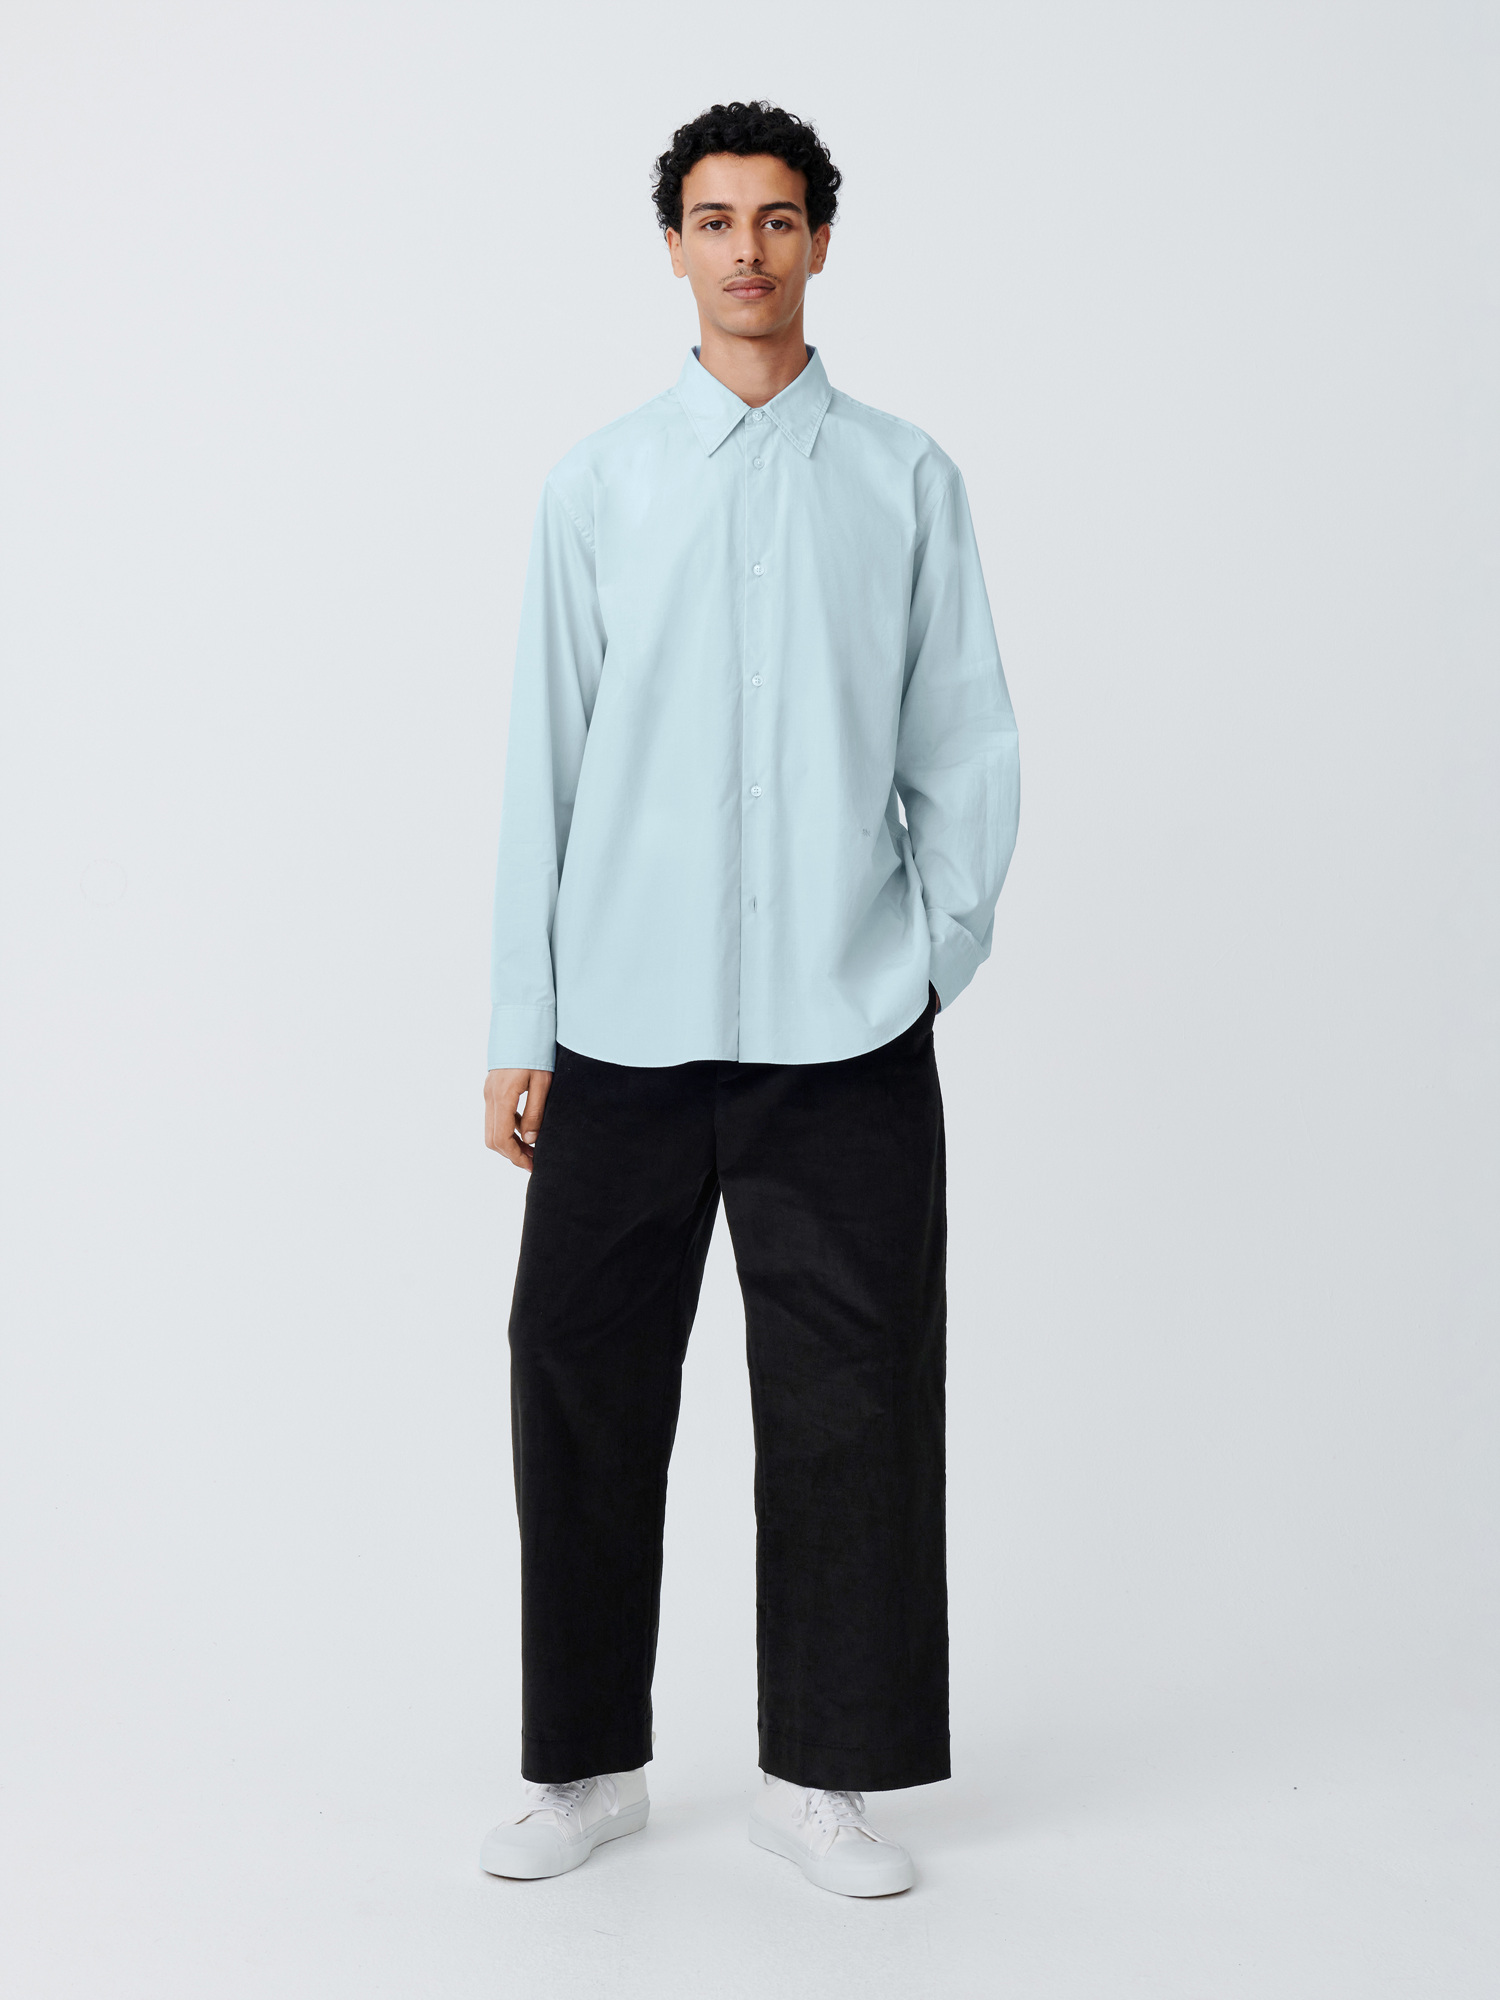 This shirt from Studio Nicholson is a very delicate, subtle shade of pale blue.